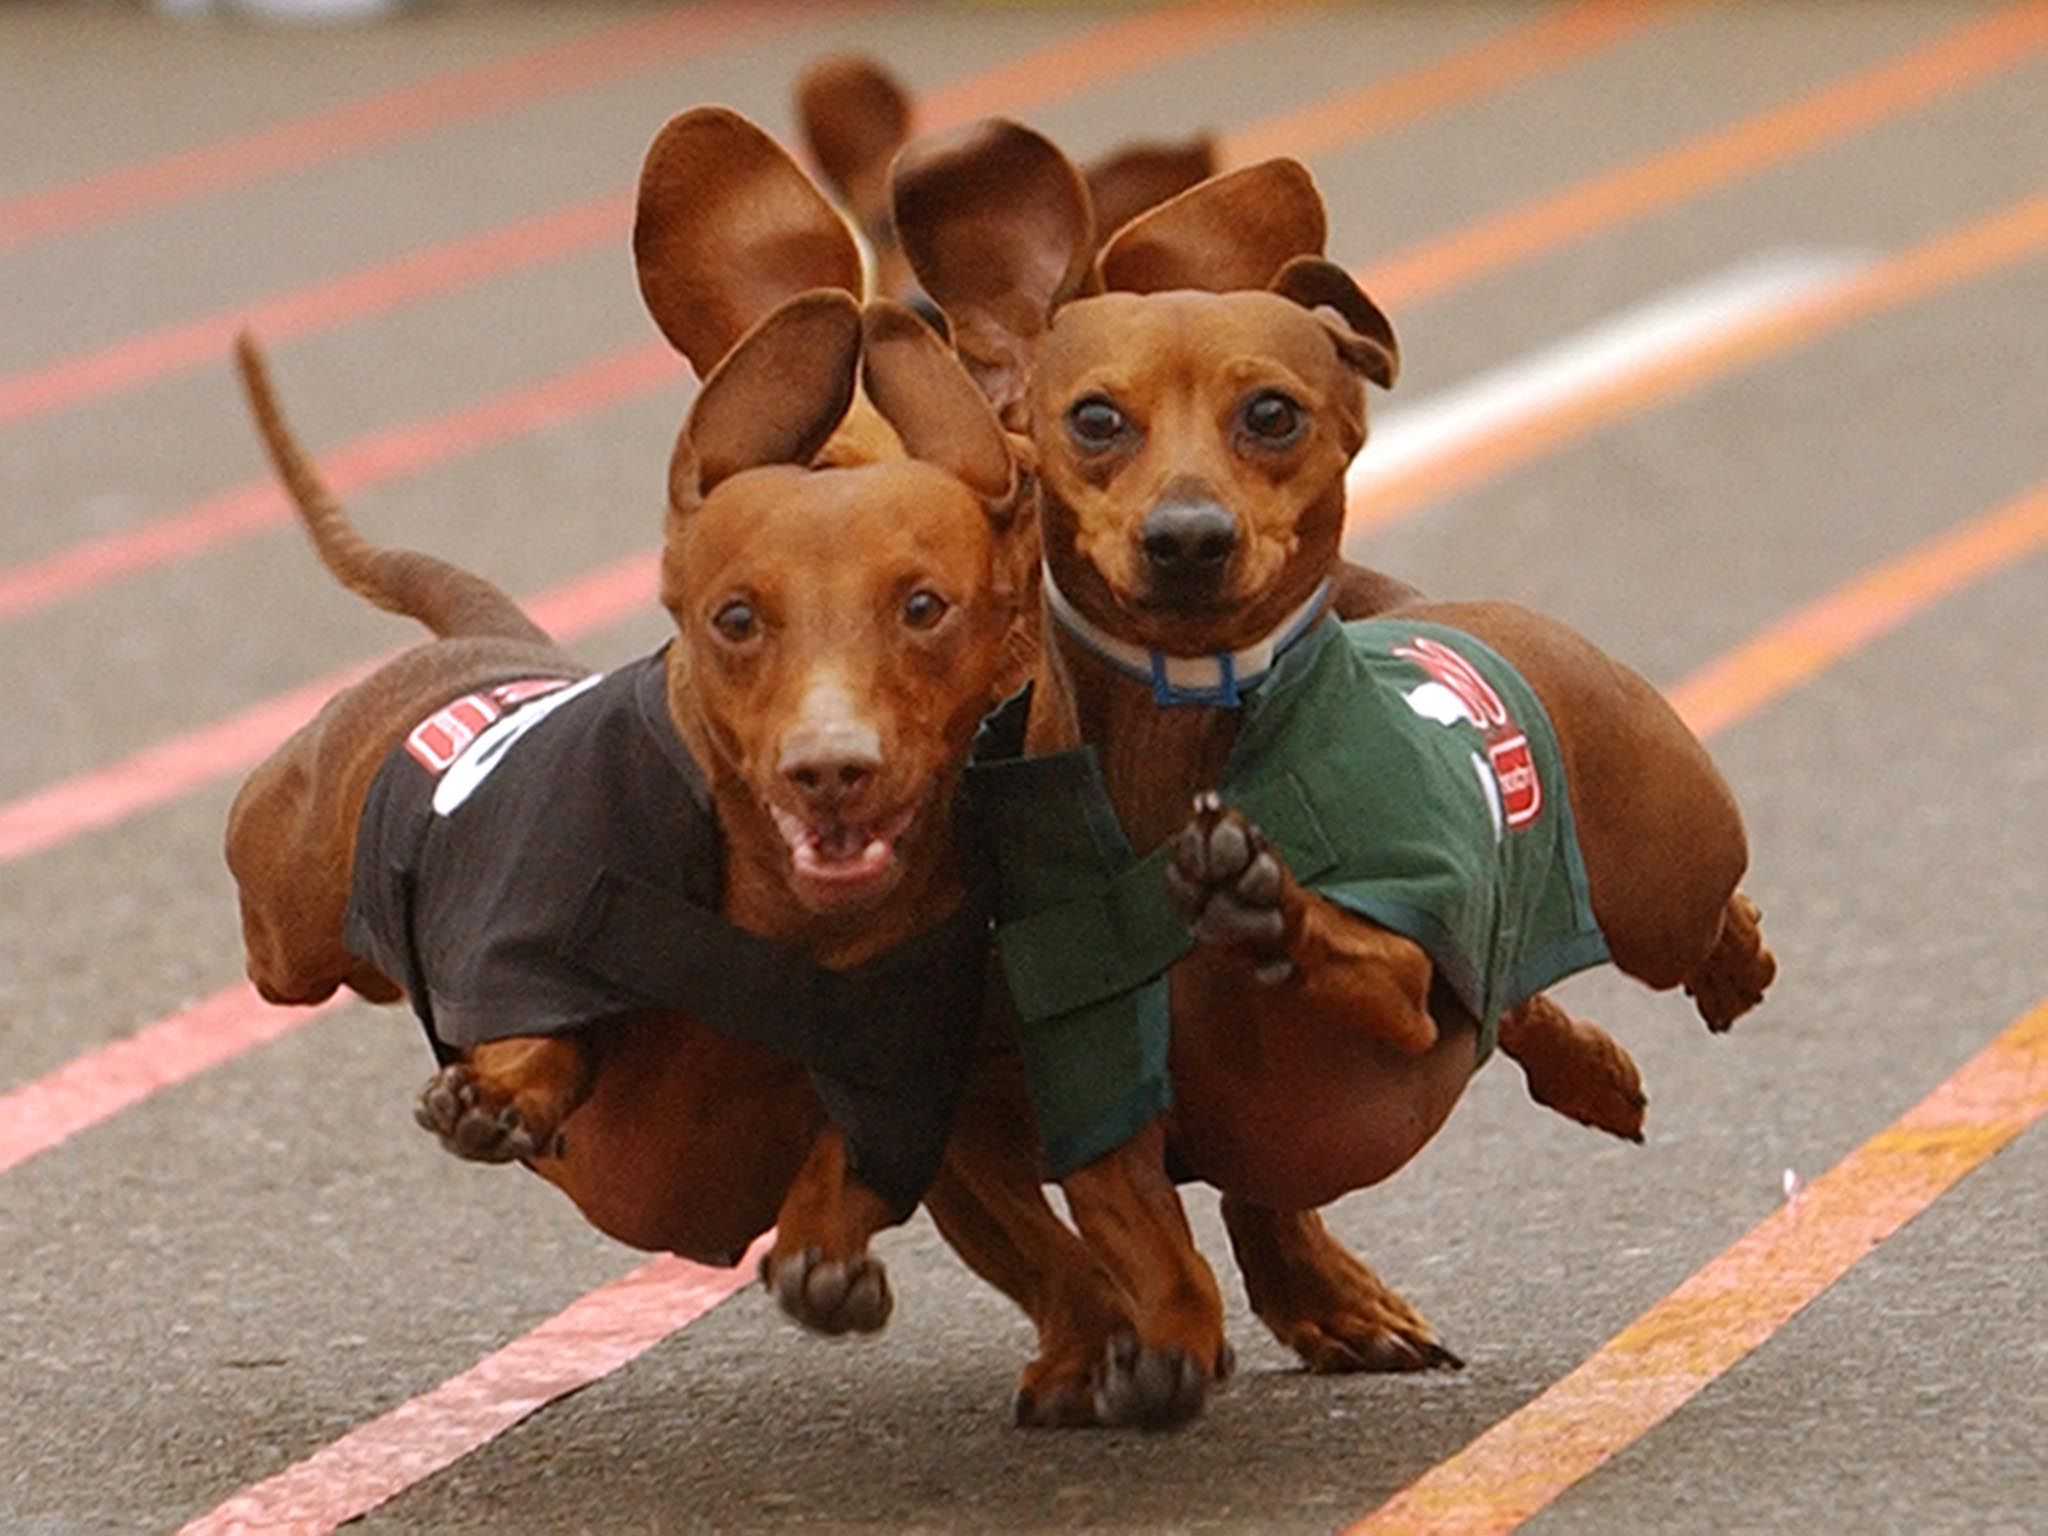 Dachshunds running next to each other in a competition